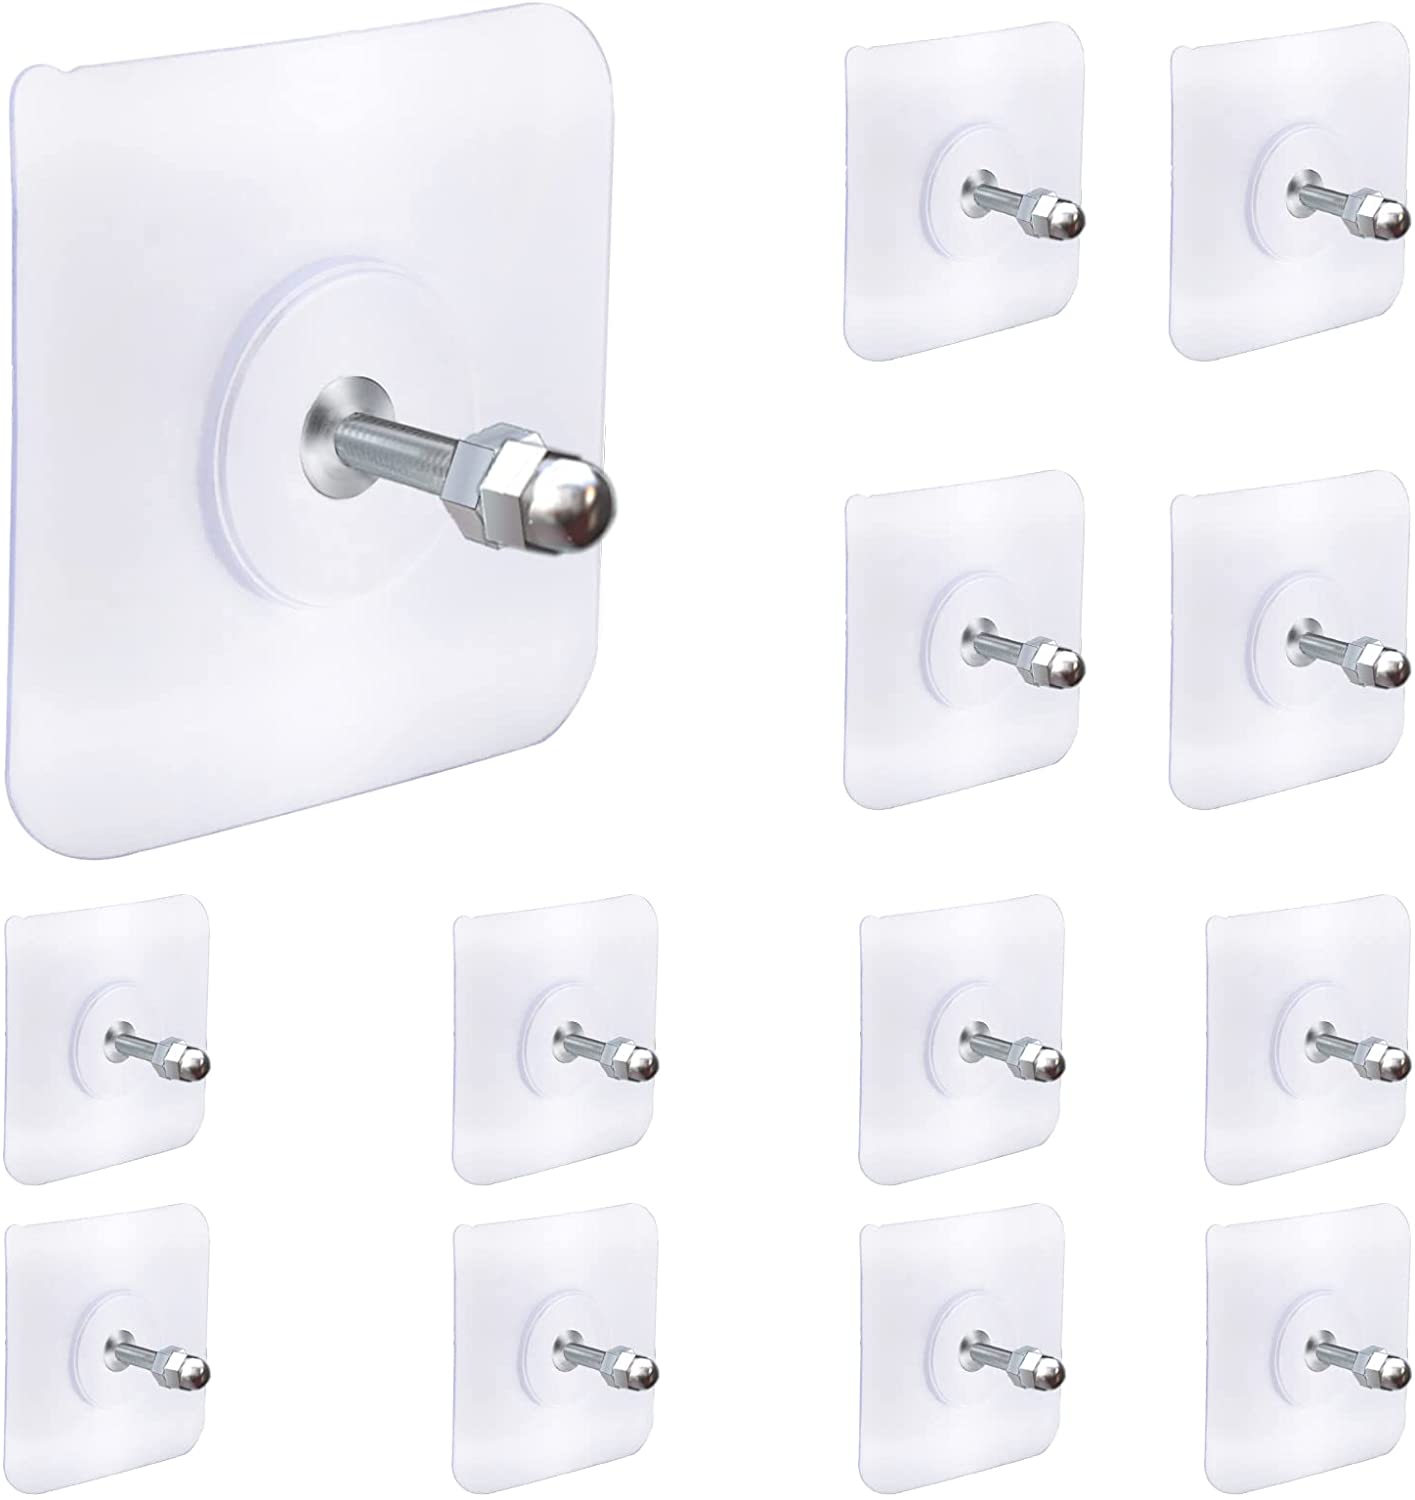 Adhesive Hooks Heavy Duty,13 Pack Wall Hooks for Hanging,Wall Hangers Without Nails,2 in 1 Screw Free Sticker for Wall Mount Shelf,Waterproof